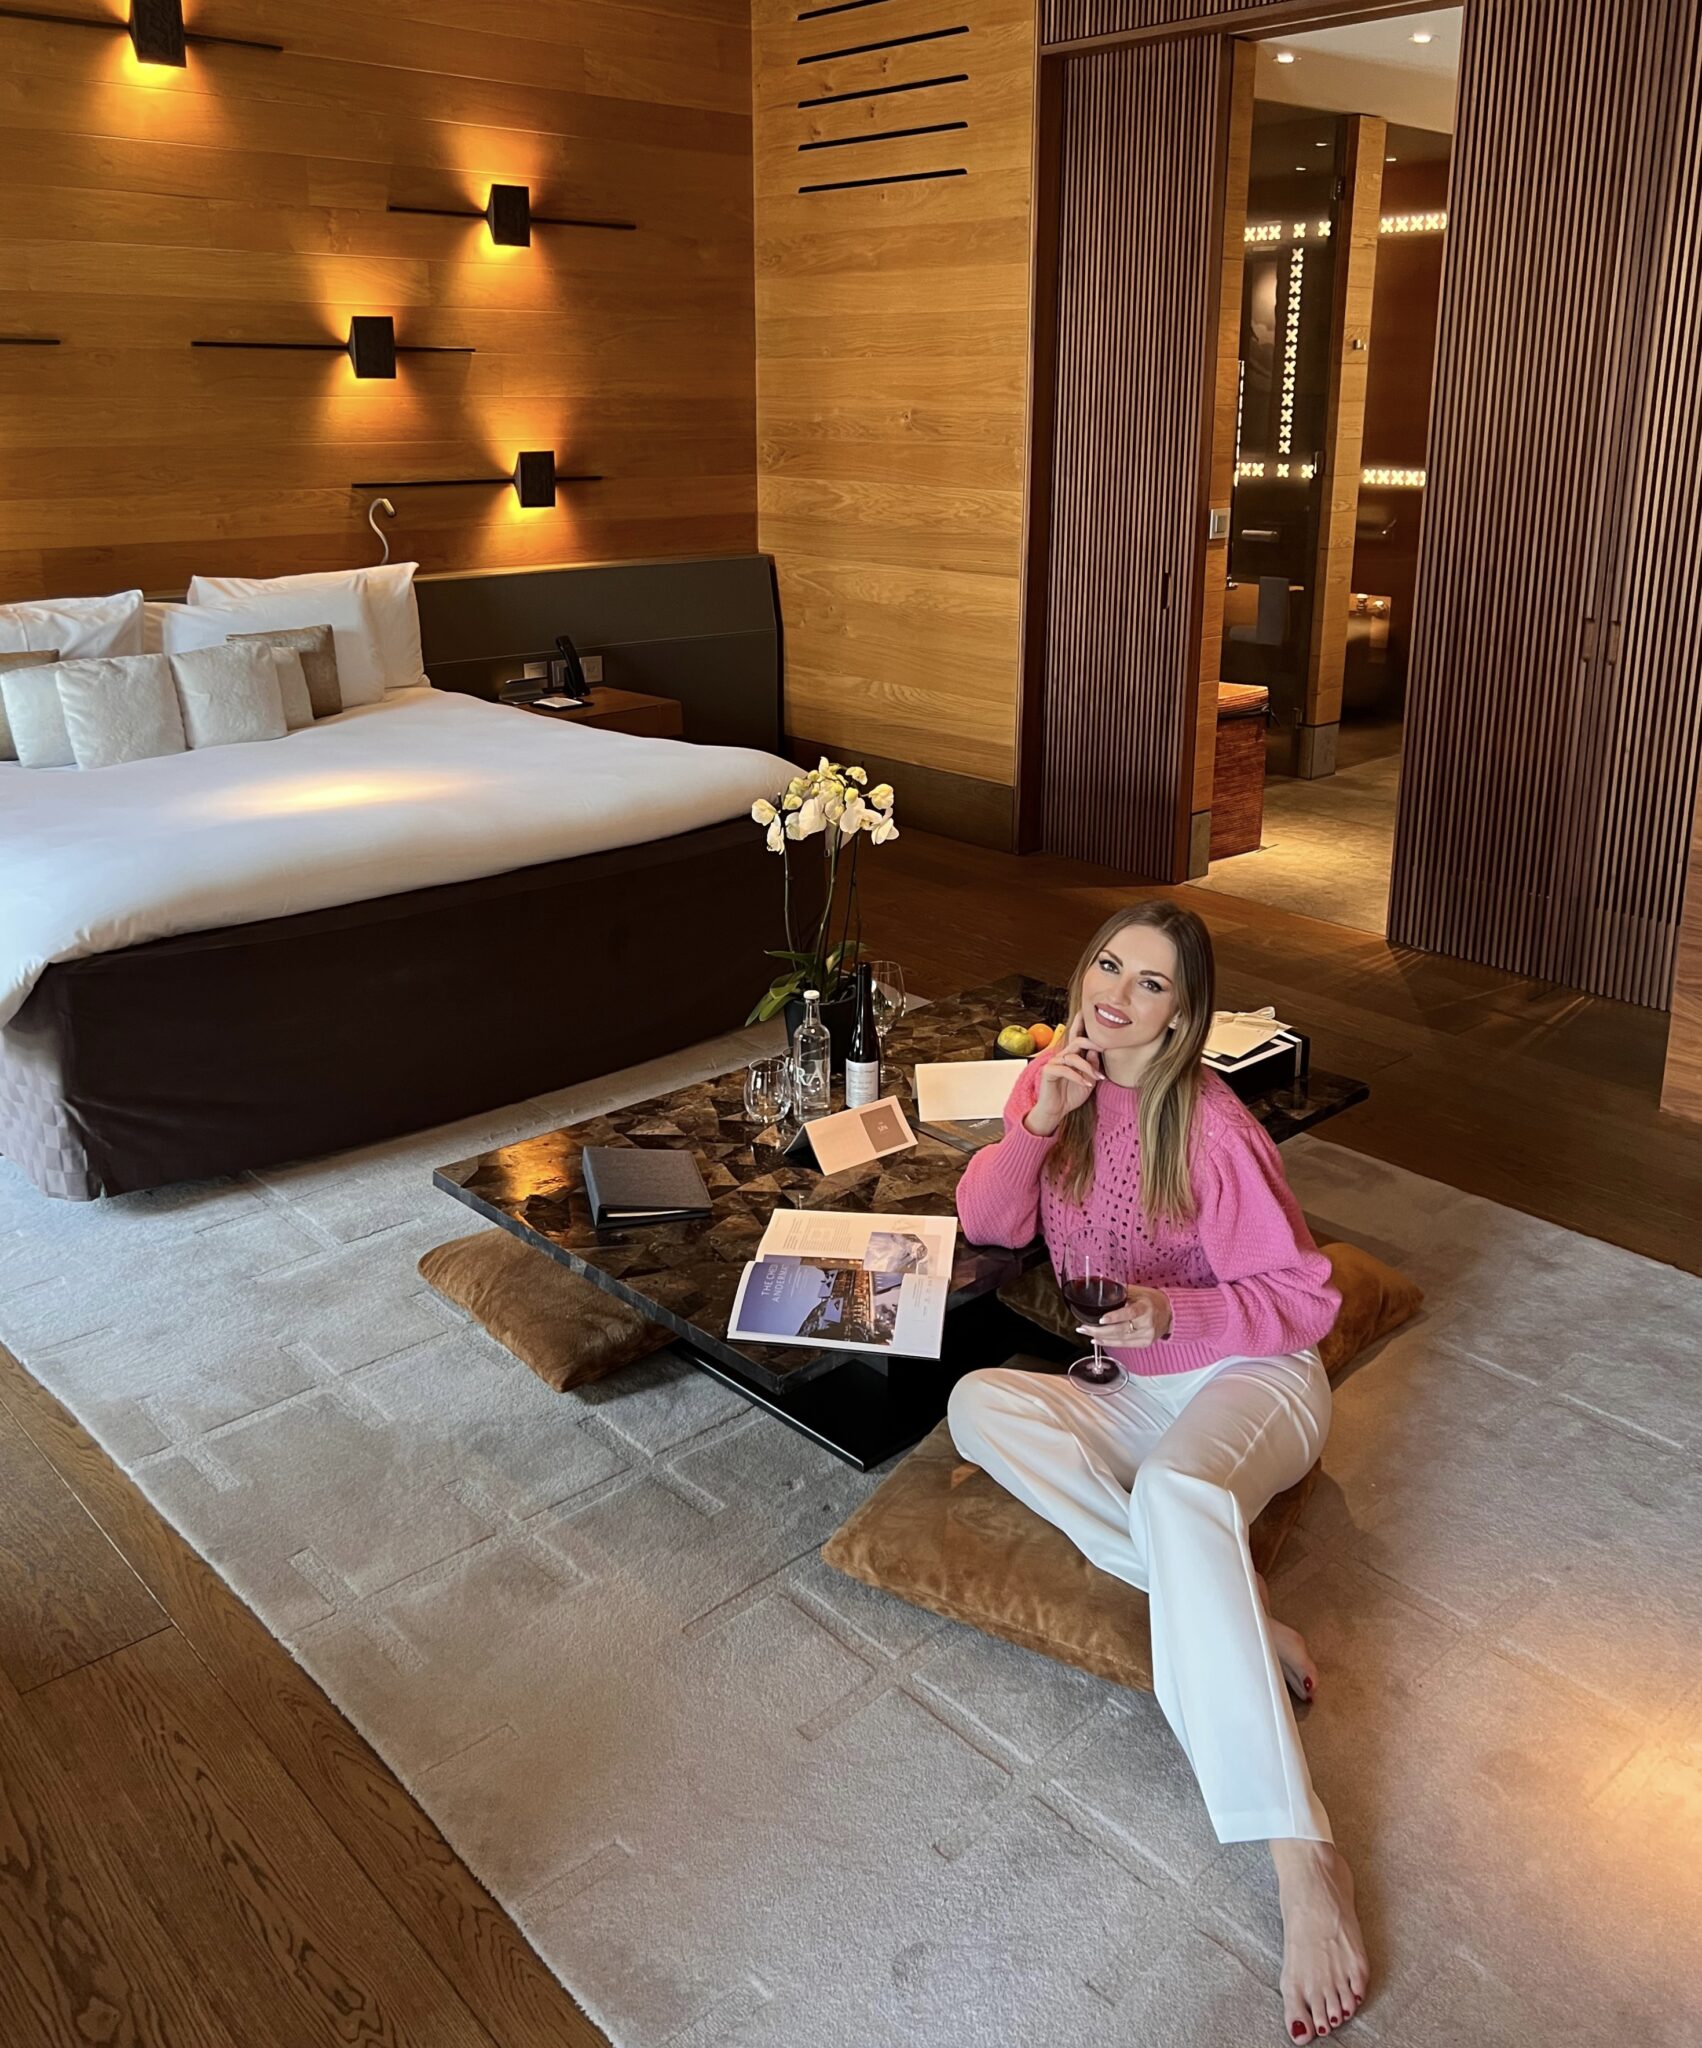 THE CHEDI ANDERMATT - Understated Luxury in the Swiss Alps. Review of The Chedi Hotel in Andermatt, number 1 in Switzerland. 8